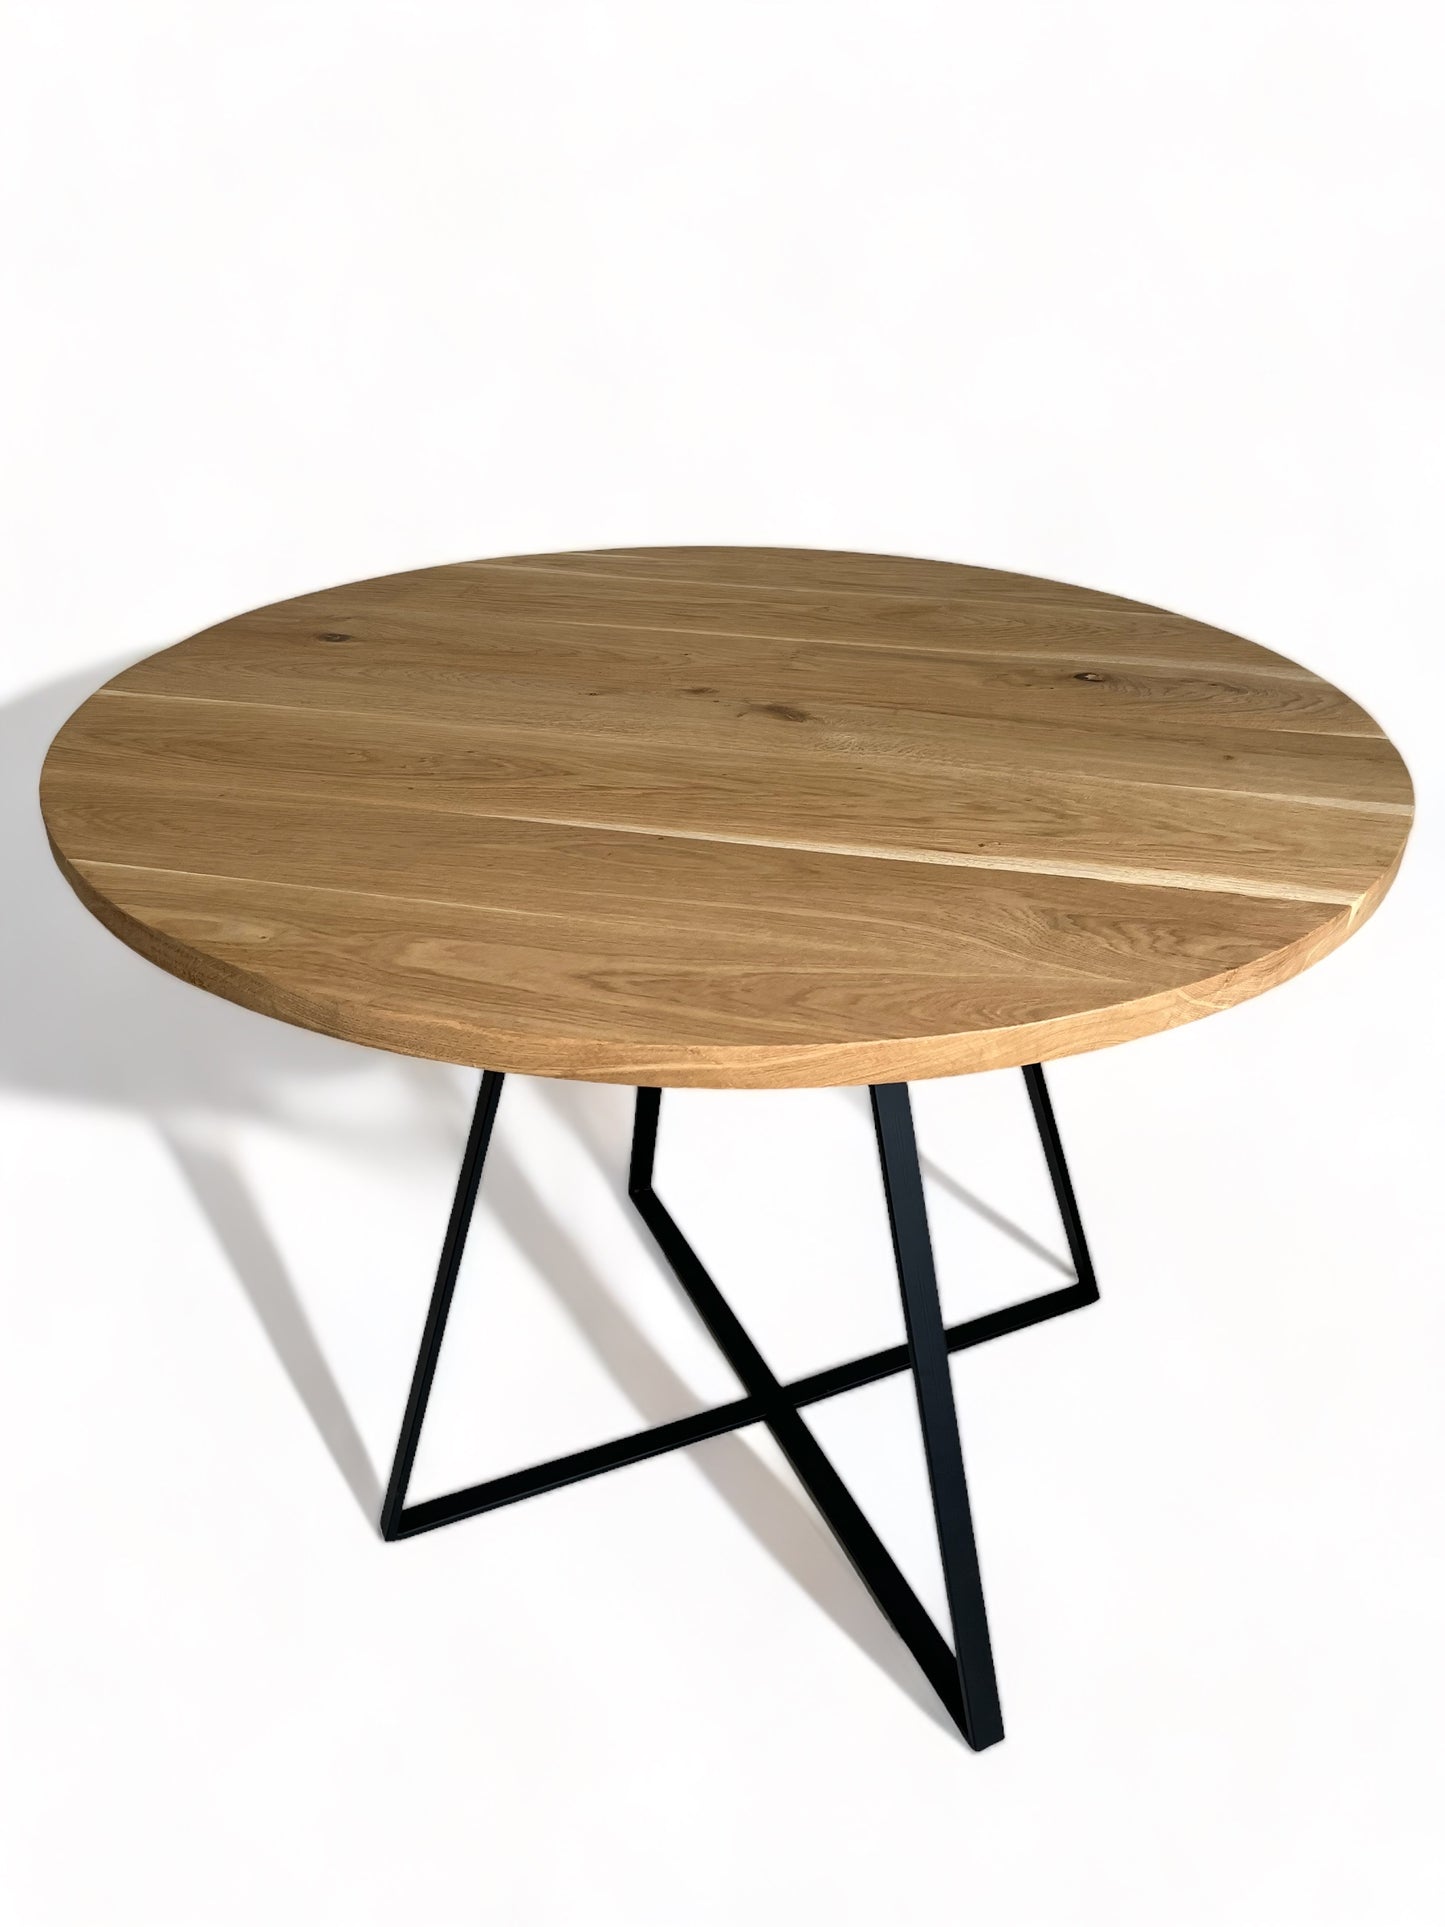 RODE oak round table